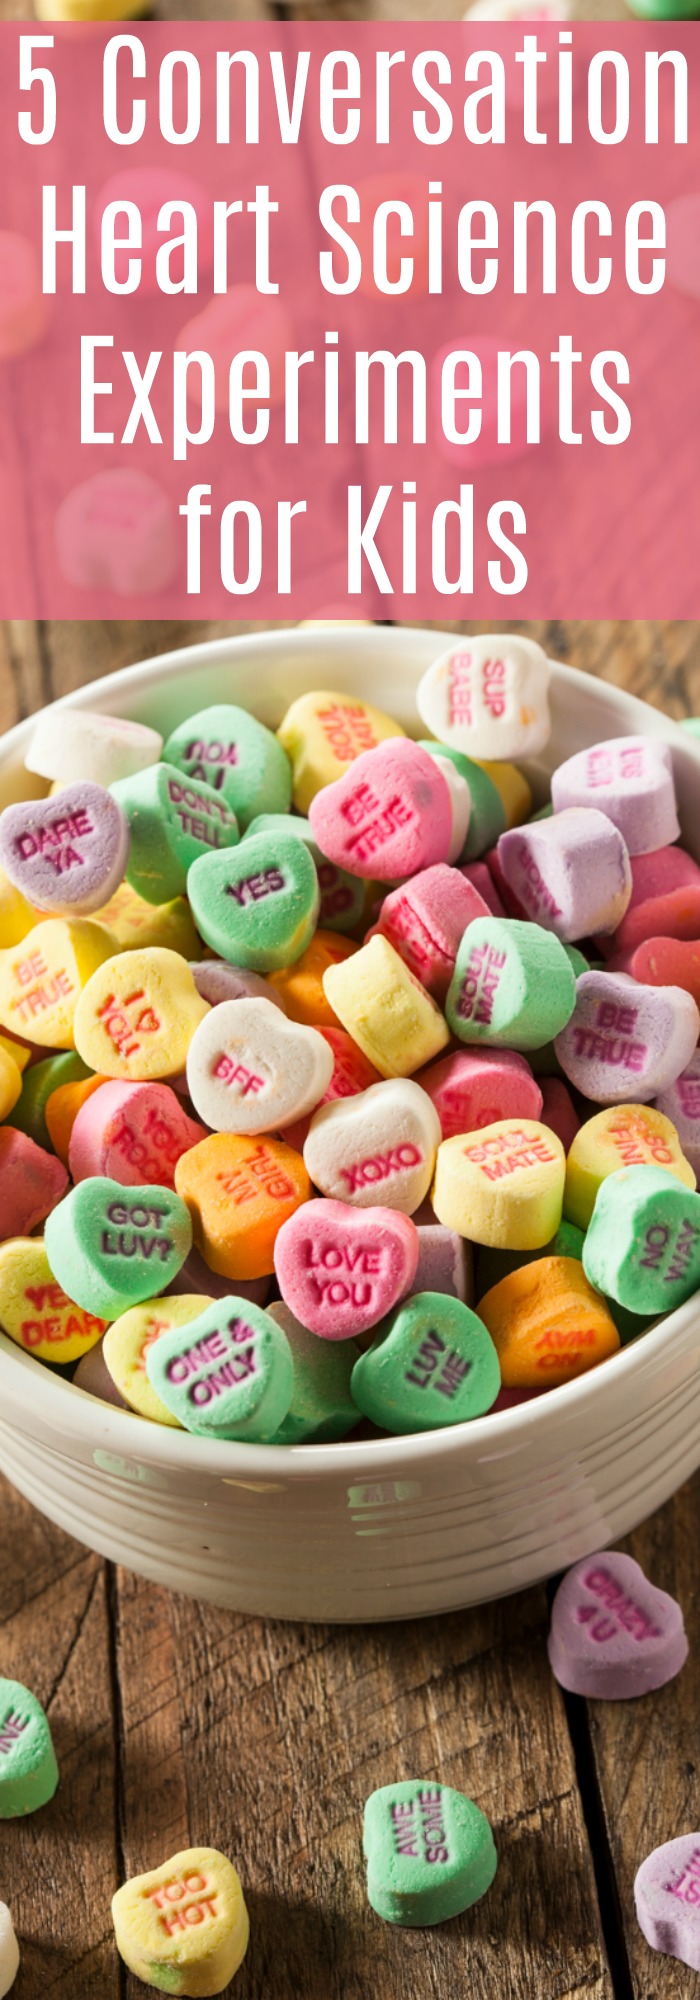 5 Conversation Hearts Science Experiments for Kids